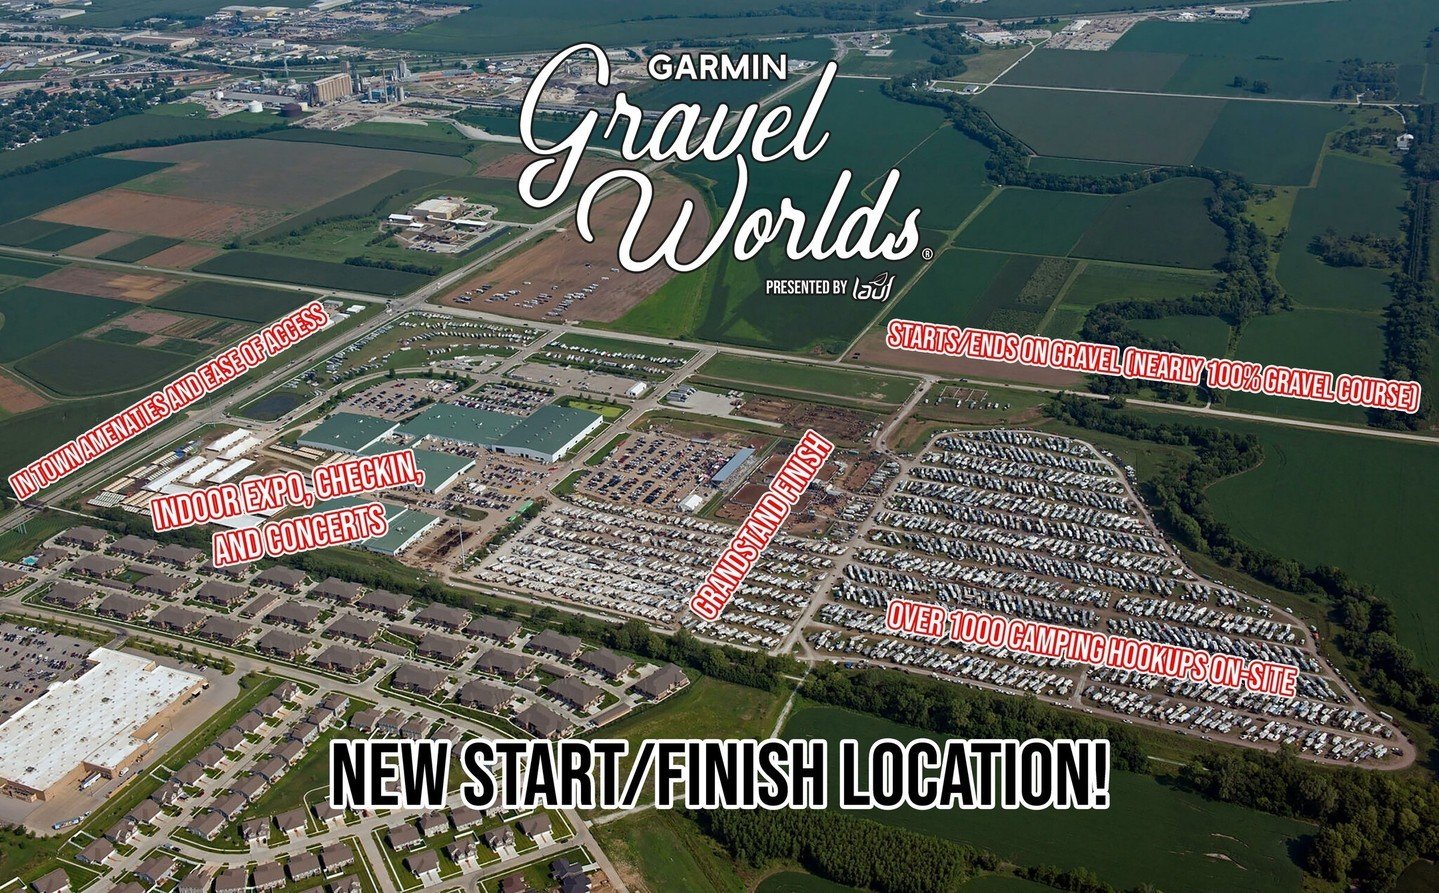 ANNOUNCING OUR NEW START LOCATION!!⁠
⁠
✅️ HISTORY: Where Gravel Worlds first started in 2010 and 2011!⁠
✅️ MORE GRAVEL: Starts/Ends on gravel. Making Gravel Worlds over 99% gravel on course! AND access to hundreds of miles of gravel never seen on Gra